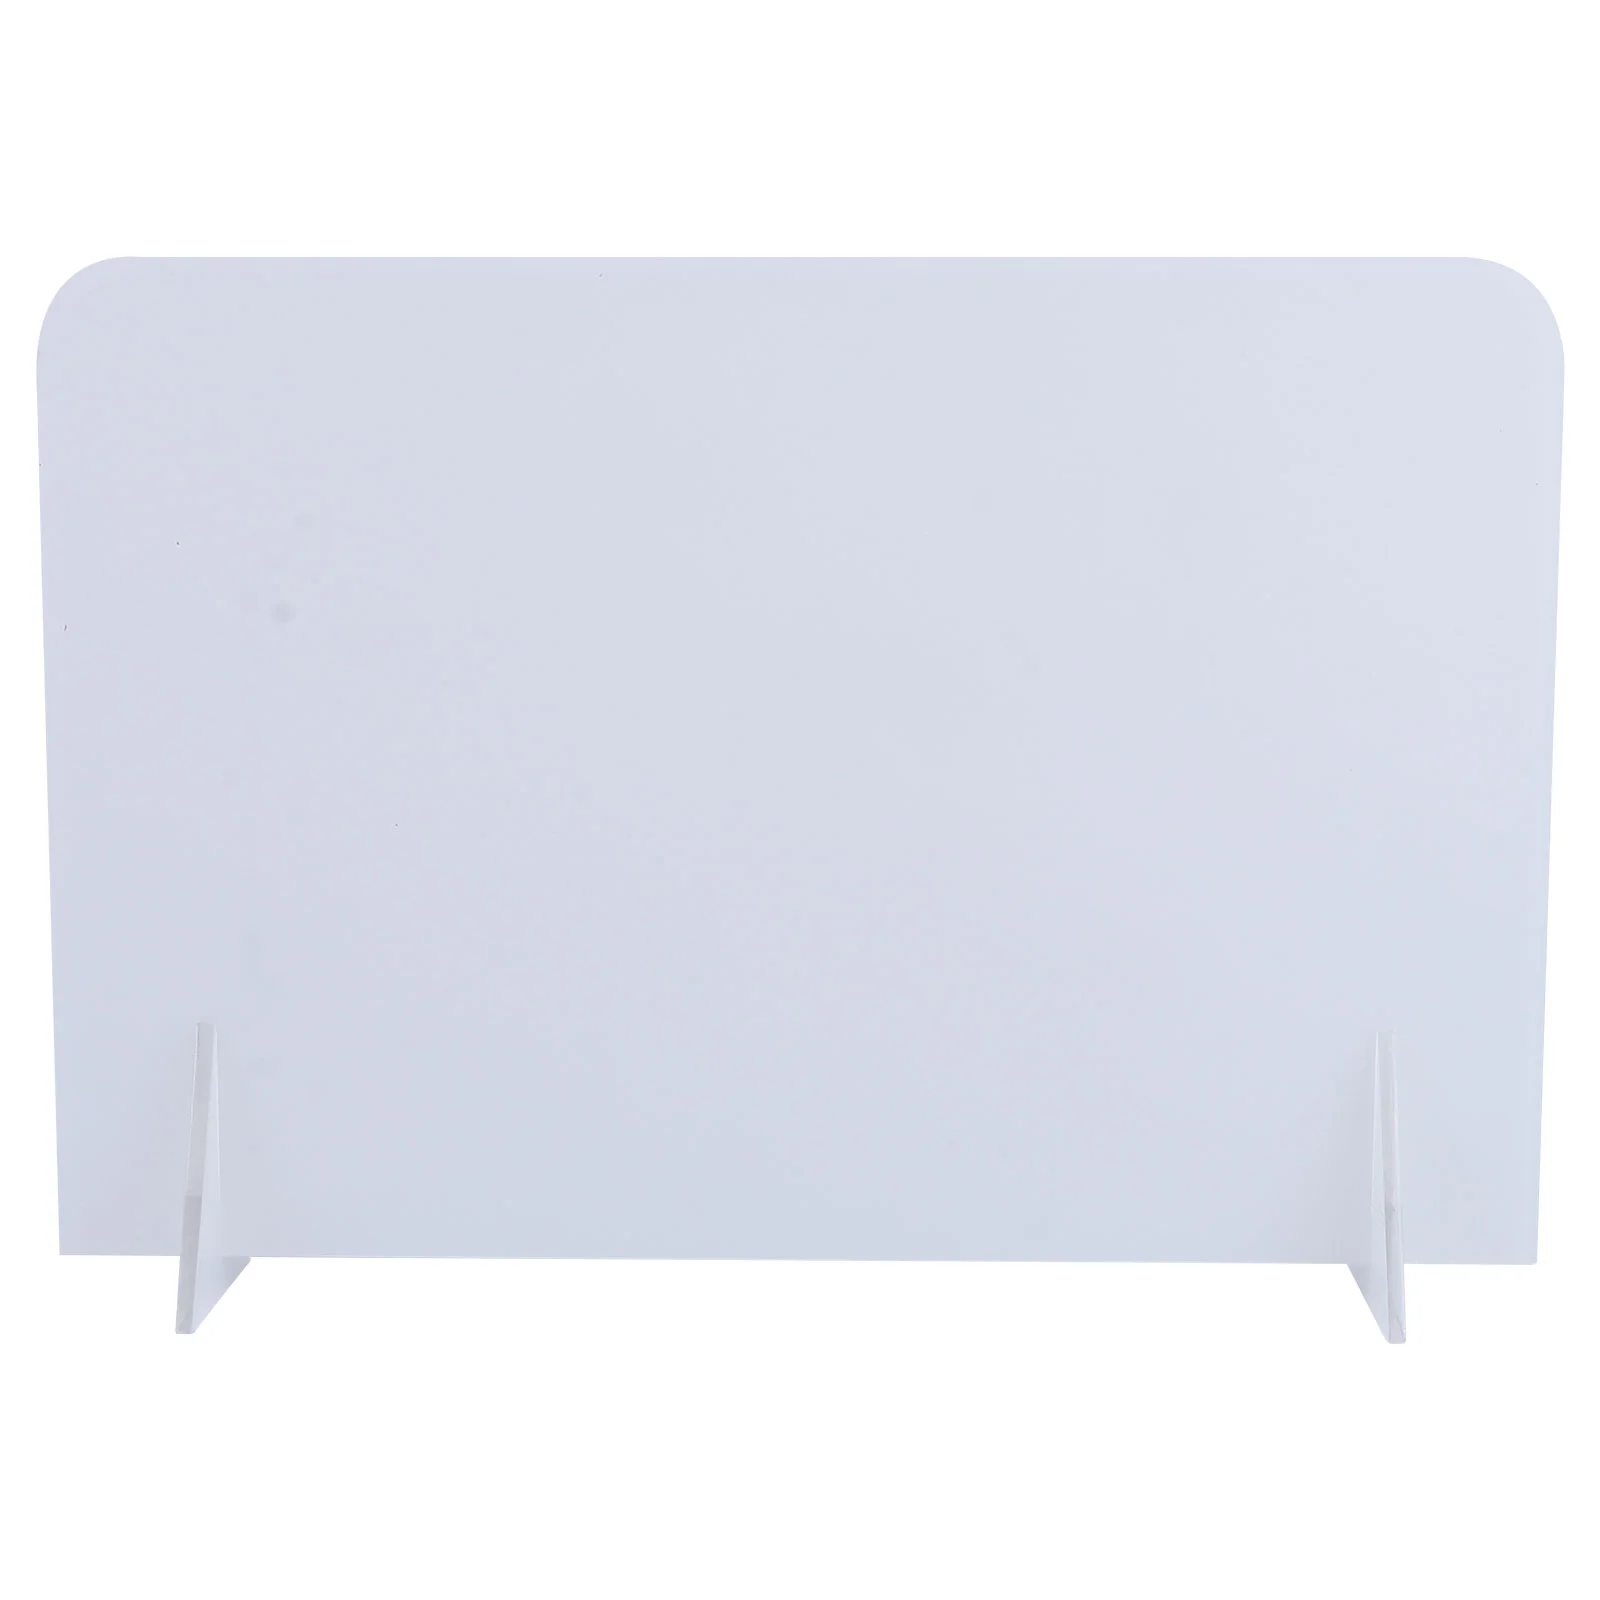 

Board Whiteboard Easel Clear Writing Mini Desktop Note Memo Transparent Acrylic White Message Words Dry Erasable Painting List